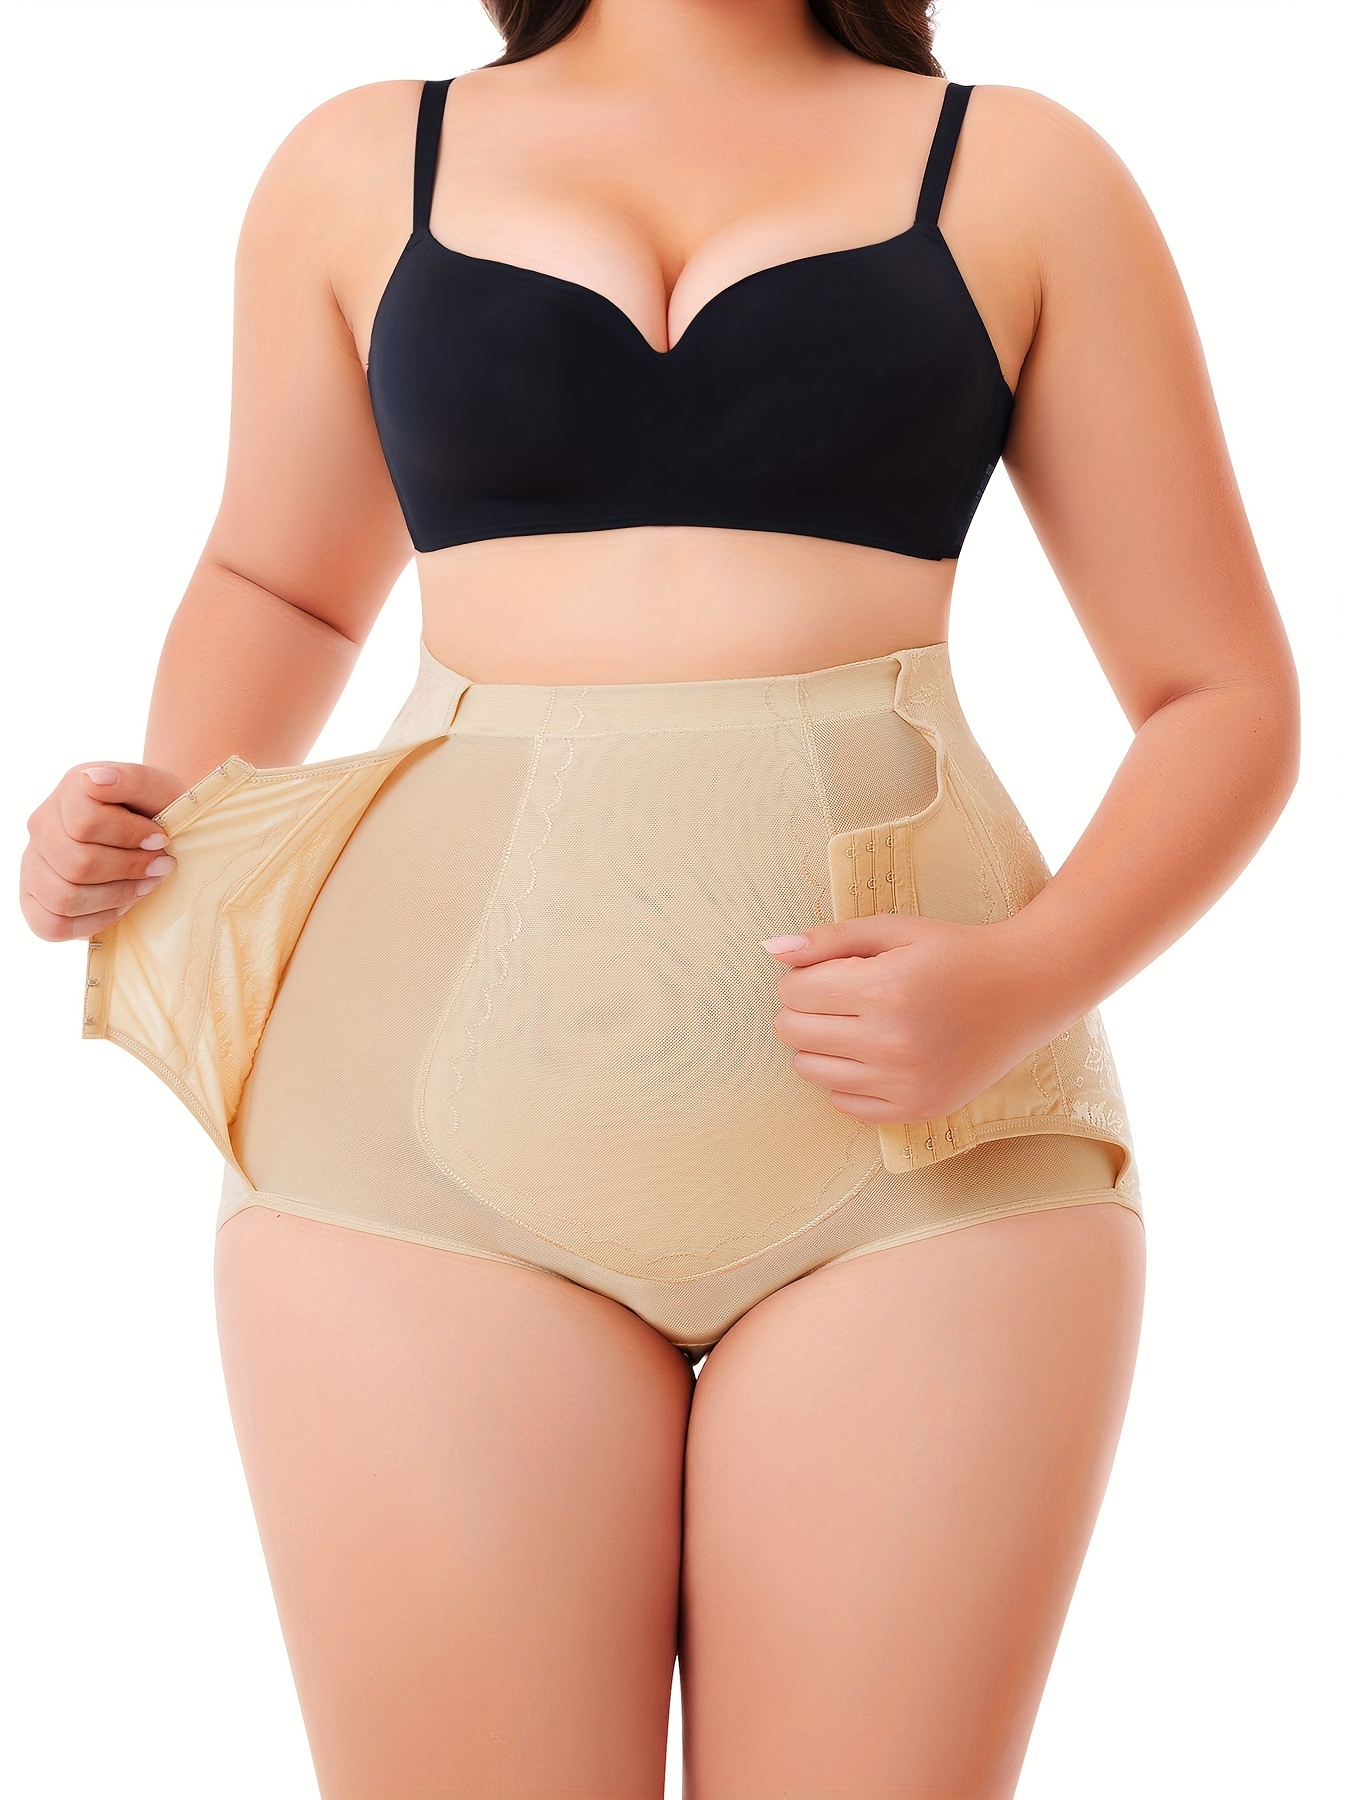 Breathable High Waist Low Waist Body Shaper For Women Fashionable And  Slimming Tummy Underwear Panty From life, $3.07